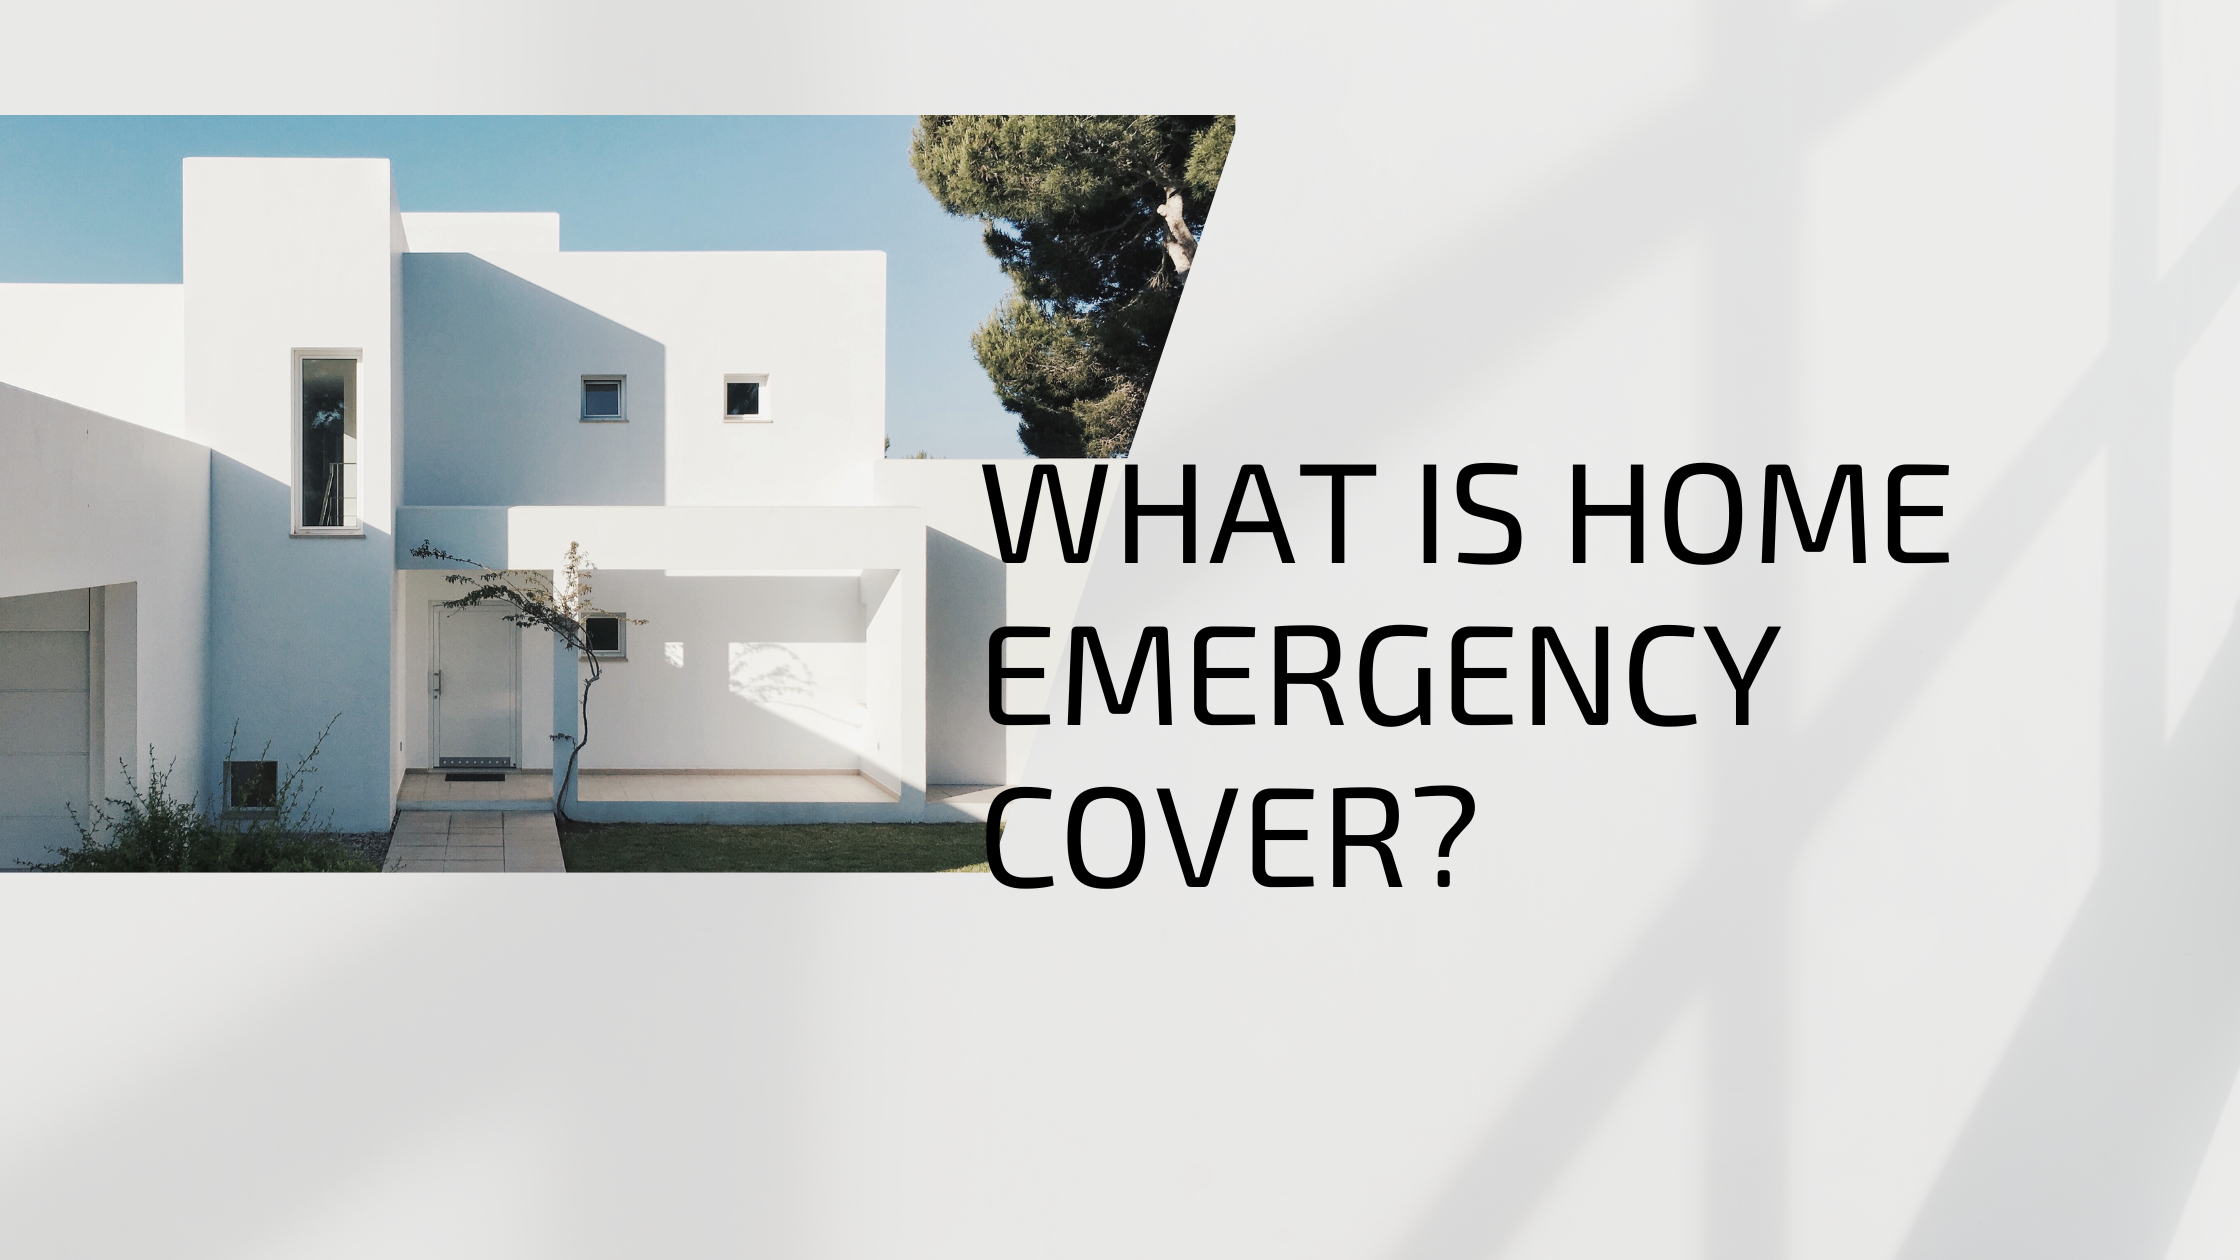 What is emergency home cover